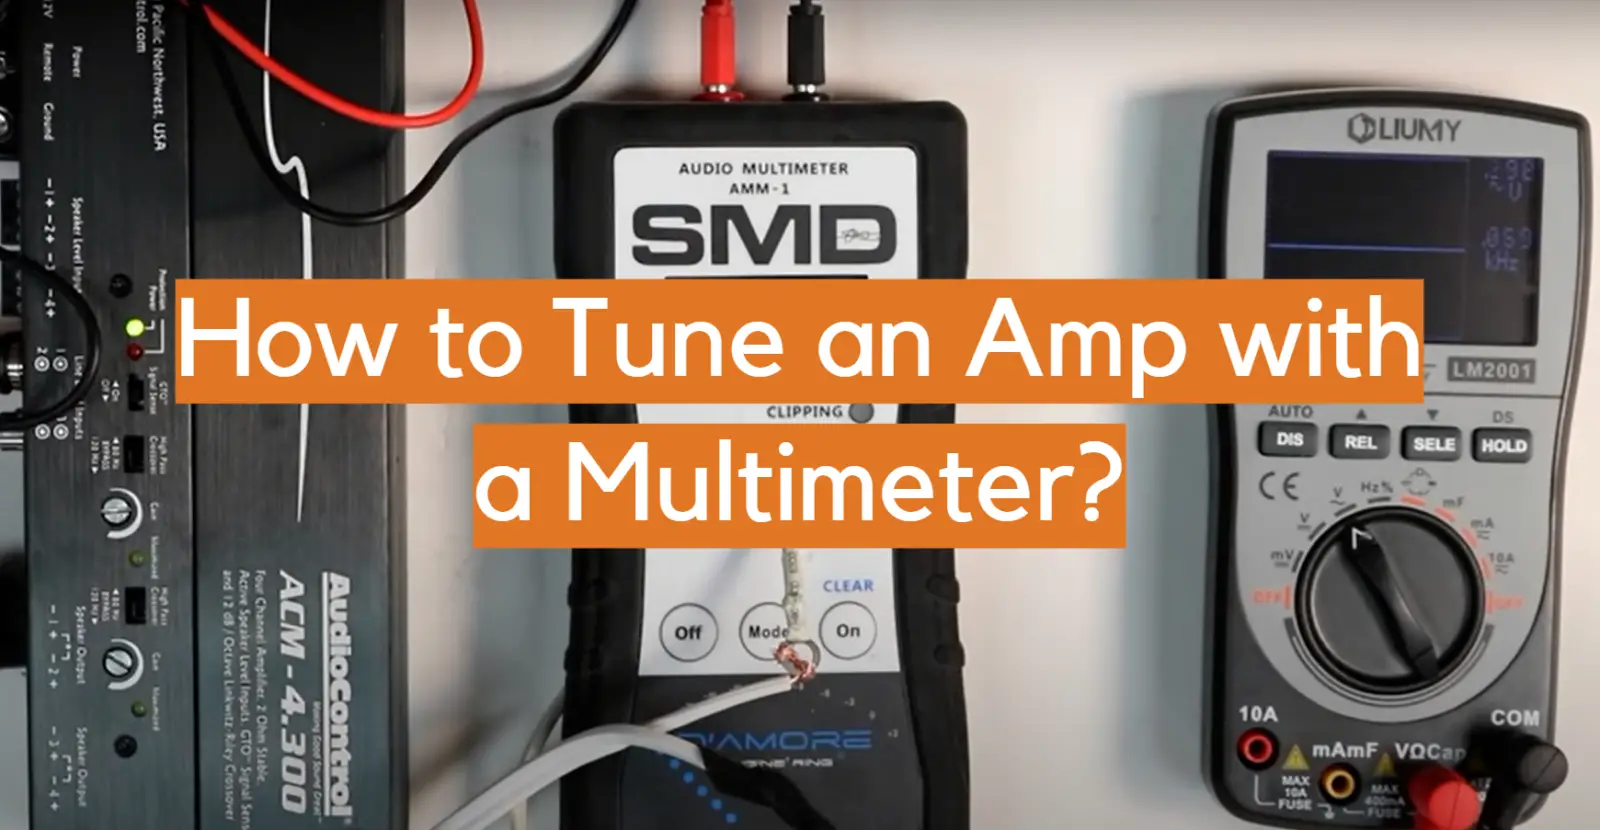 How to Tune an Amp with a Multimeter?